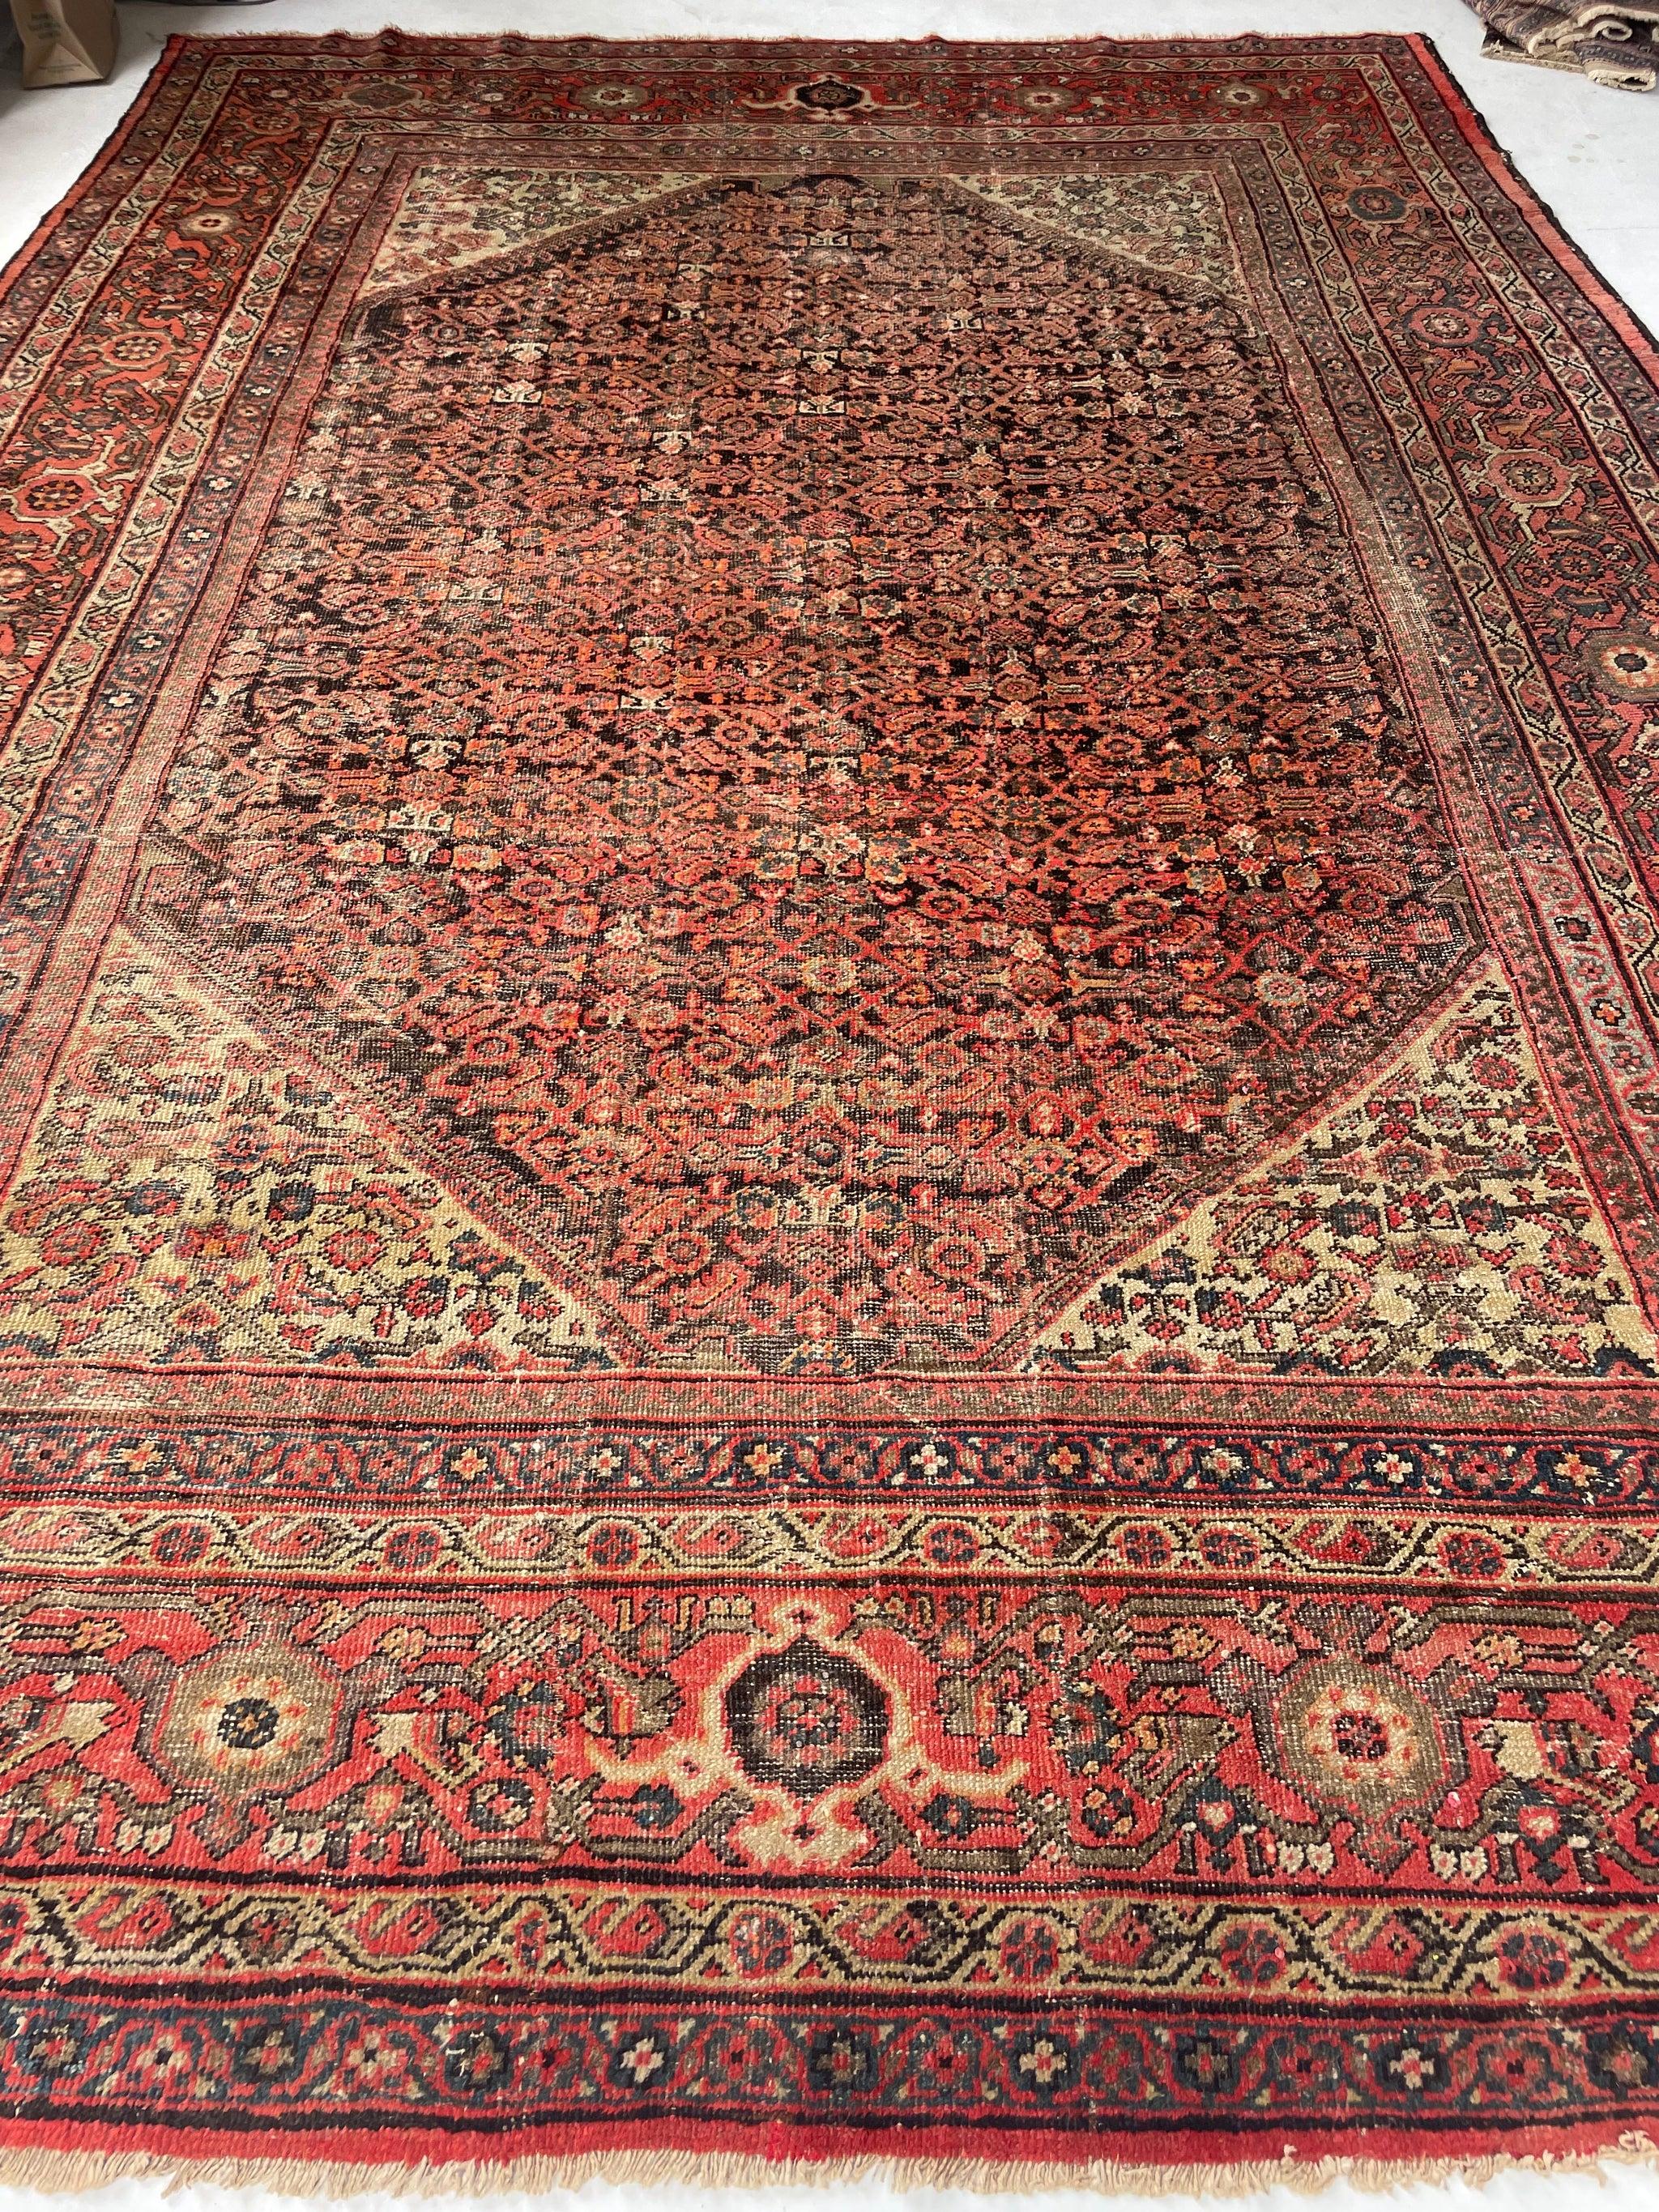 Gorgeous Large & Muted Antique Kurd-Malayer  Charcoal, Purple, Taupe, Grey, Moss, Rust, More

About: These colors are NUTS! If you look closely, you'll see Purple, Moss Greens, Pistachio, Smokey Charcoal black, Tones of NATURAL taupe, grey, beige,